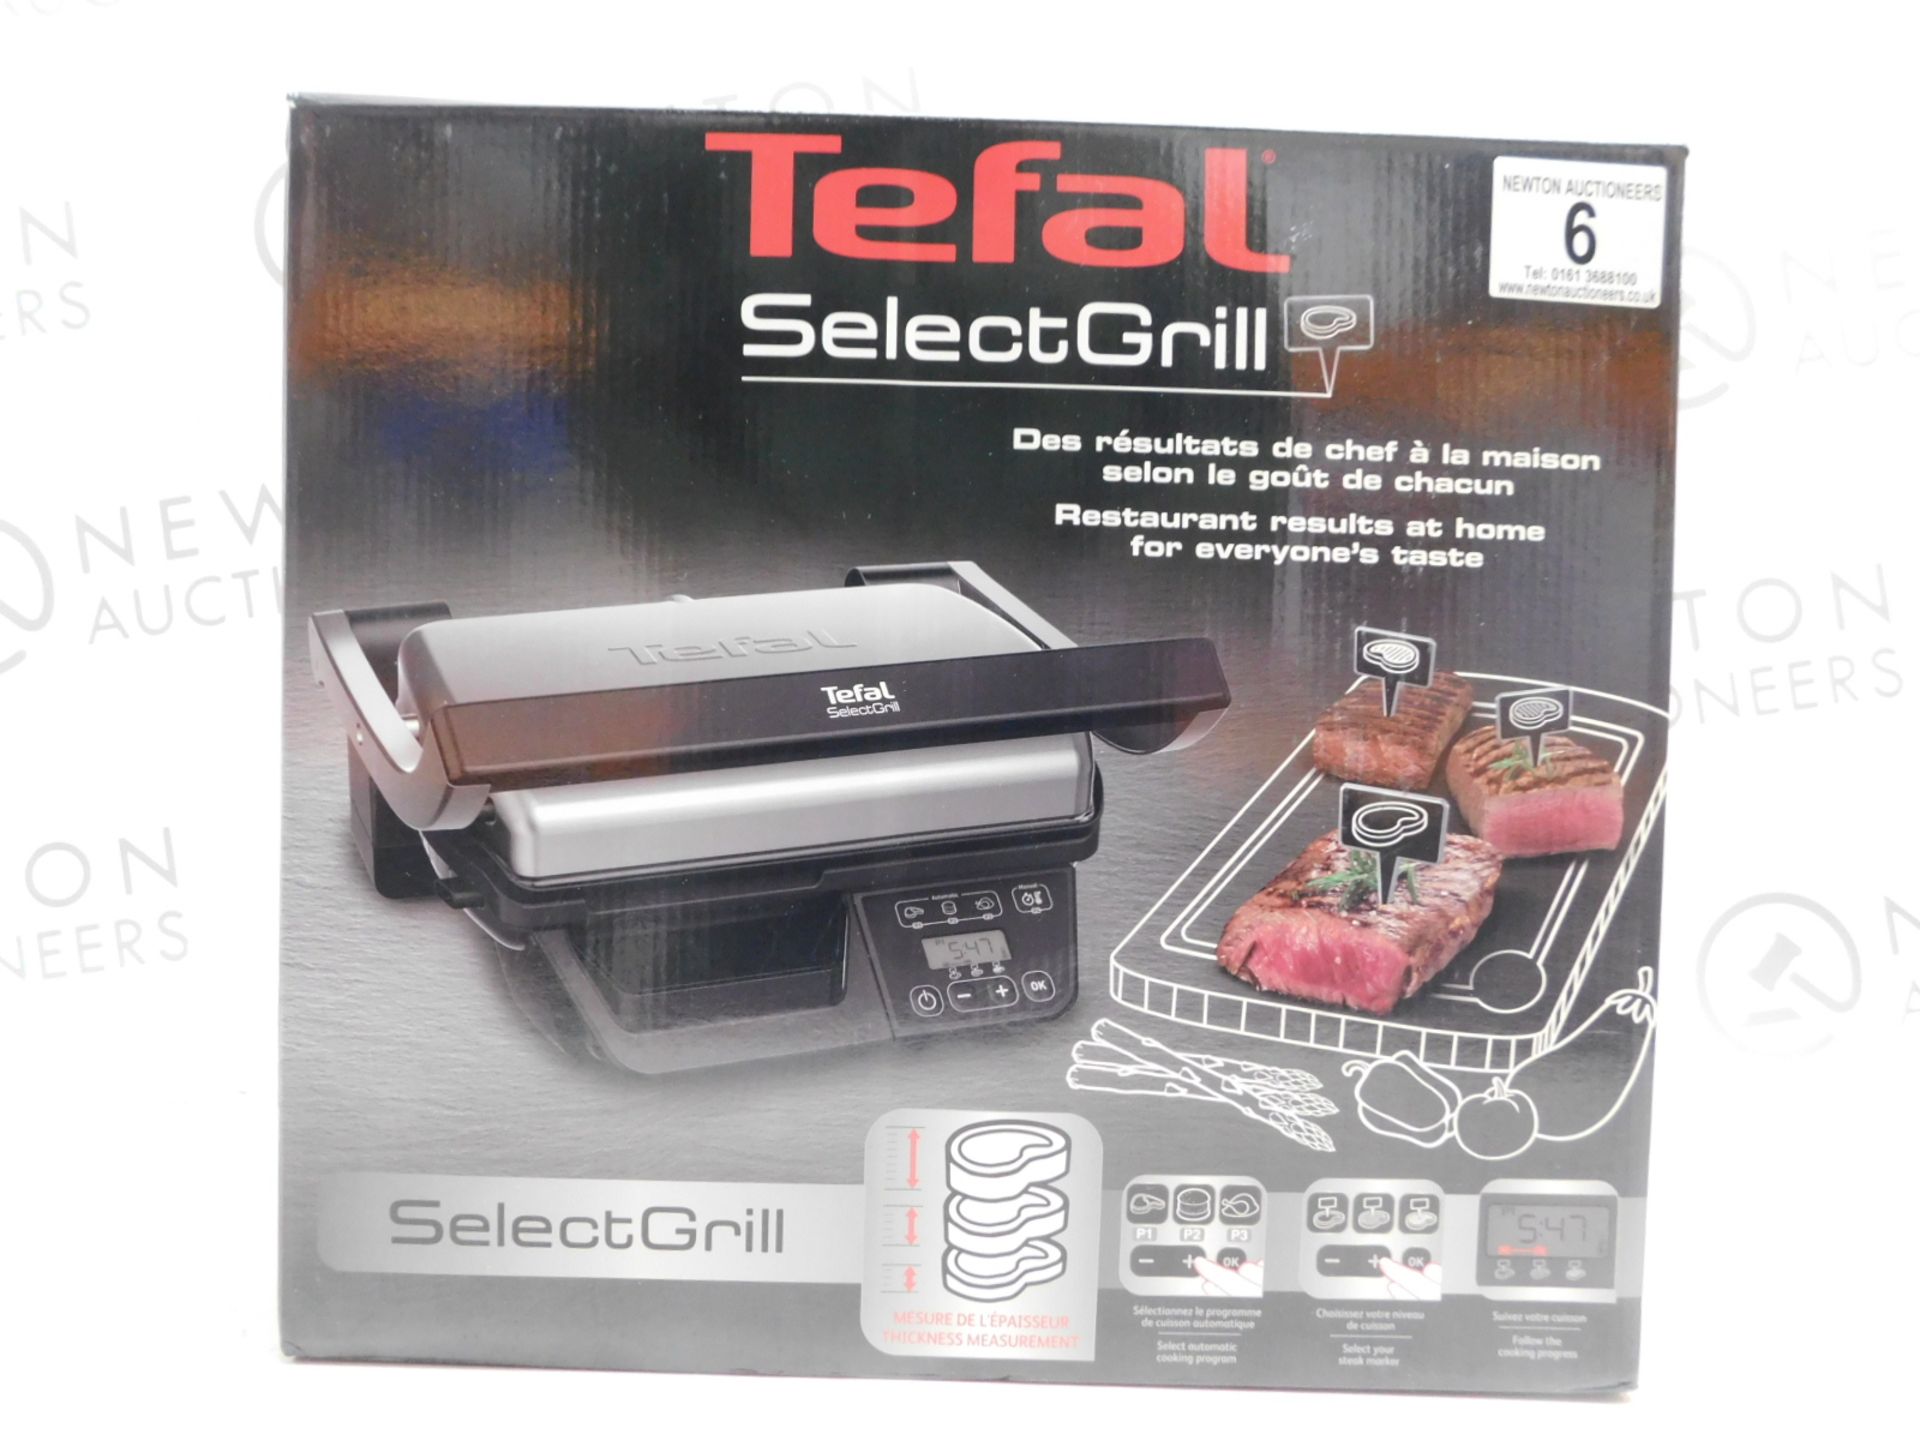 1 BOXED TEFAL SELECT GRILL GC740B40 5 PORTION ELECTRIC HEALTH GRILL RRP Â£199 (LIKE NEW CONDITION)